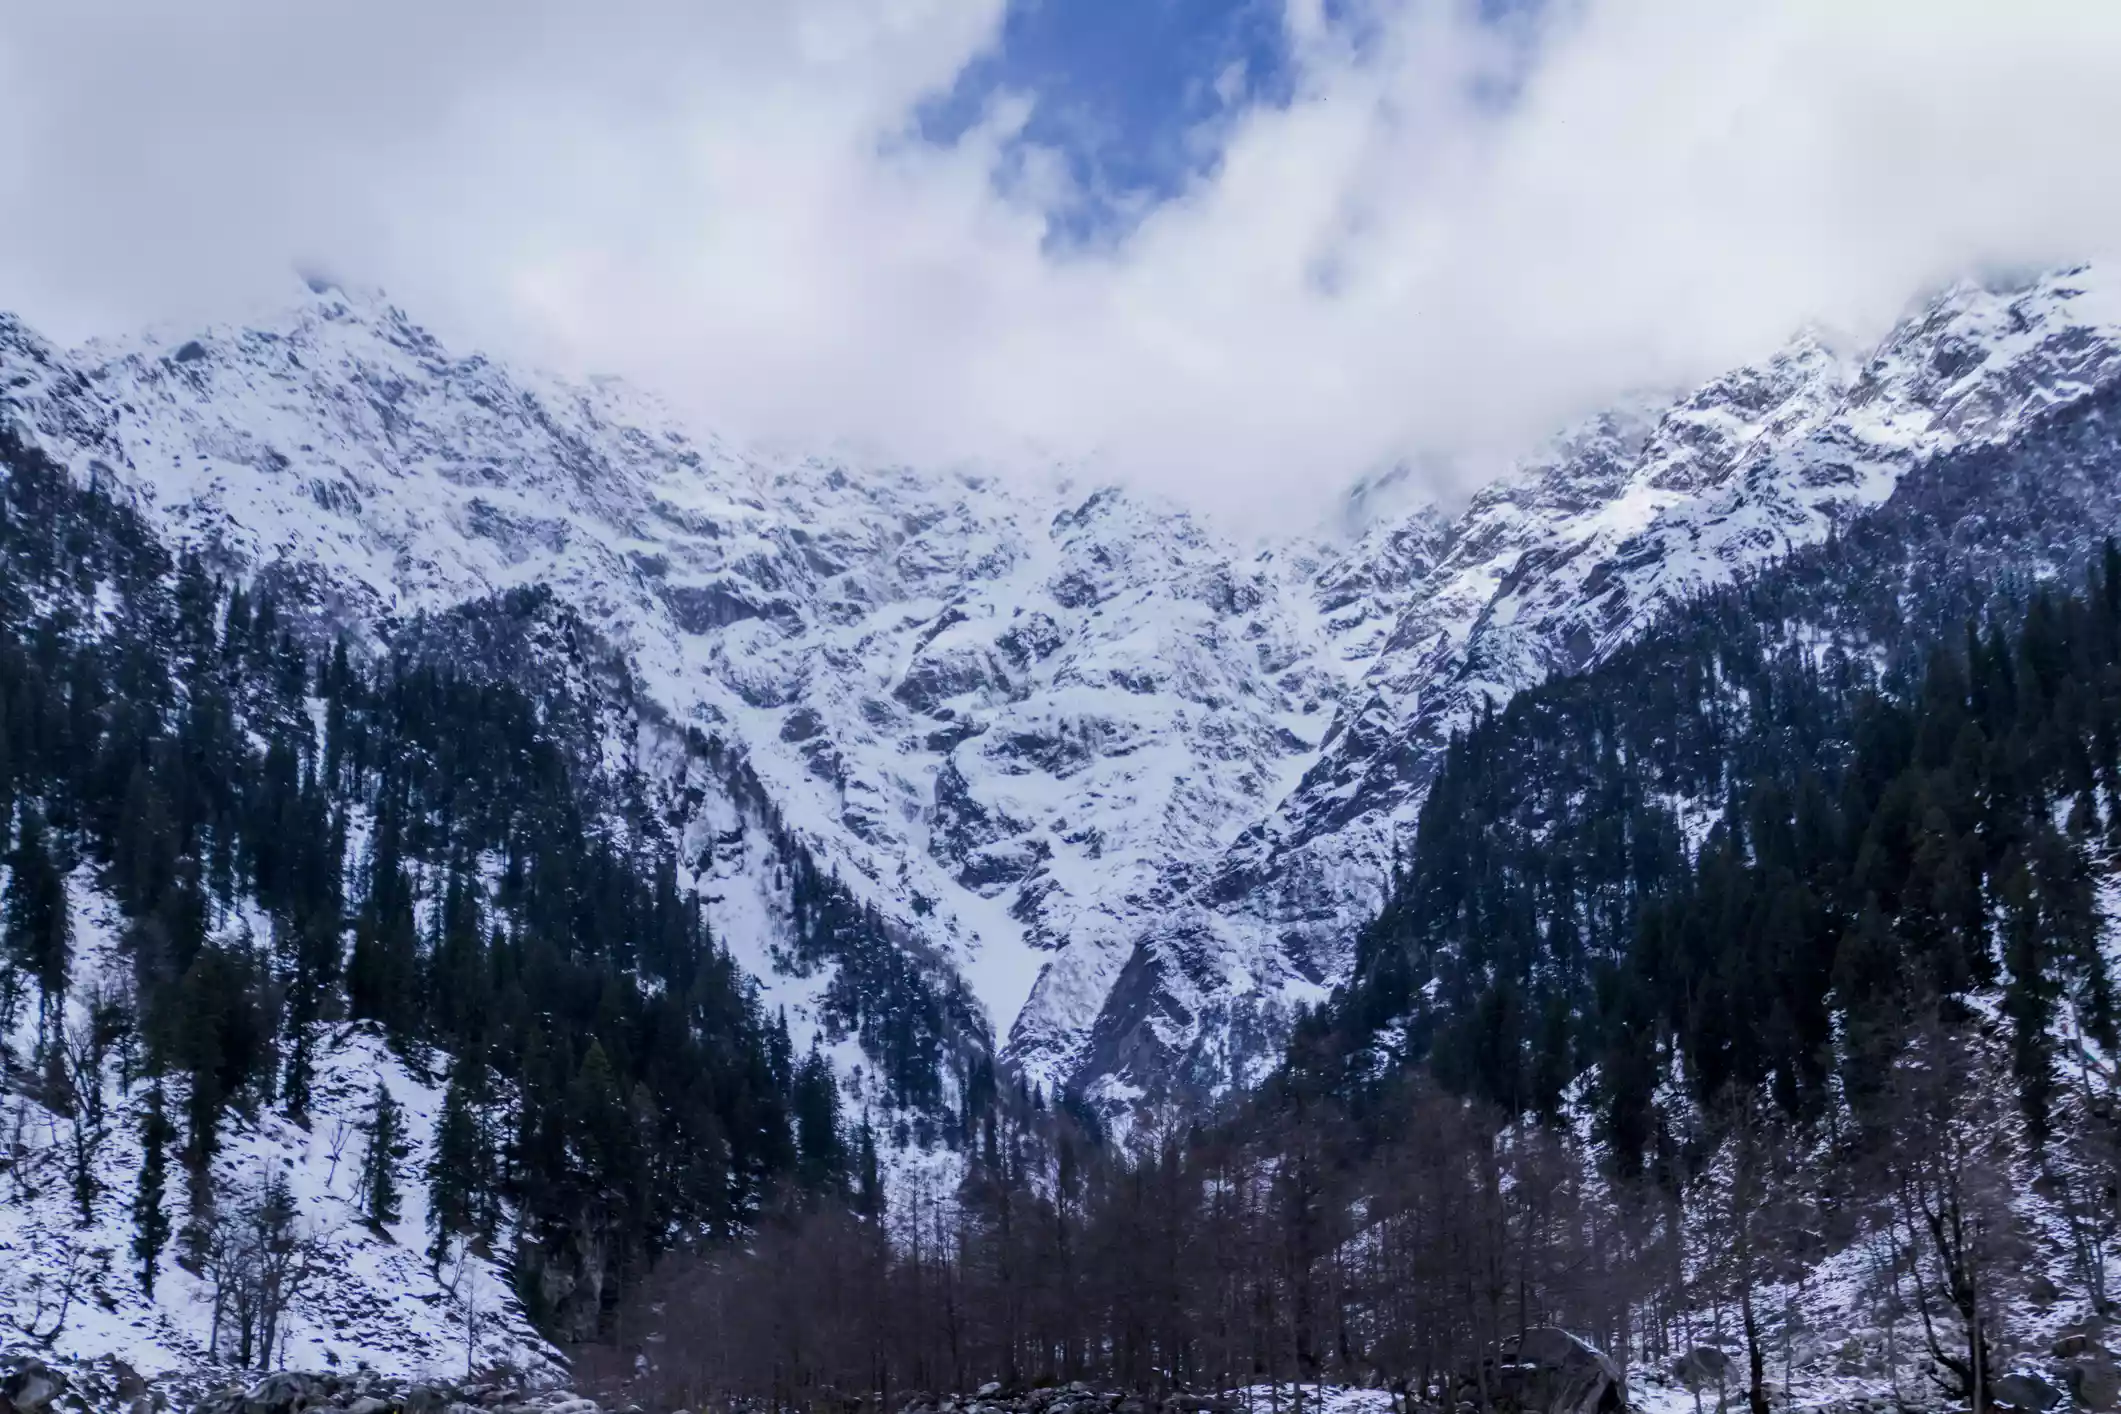 Snow-covered mountain peaks in Solang Valley, India, with tall trees in foreground and blue sky and white clouds in background